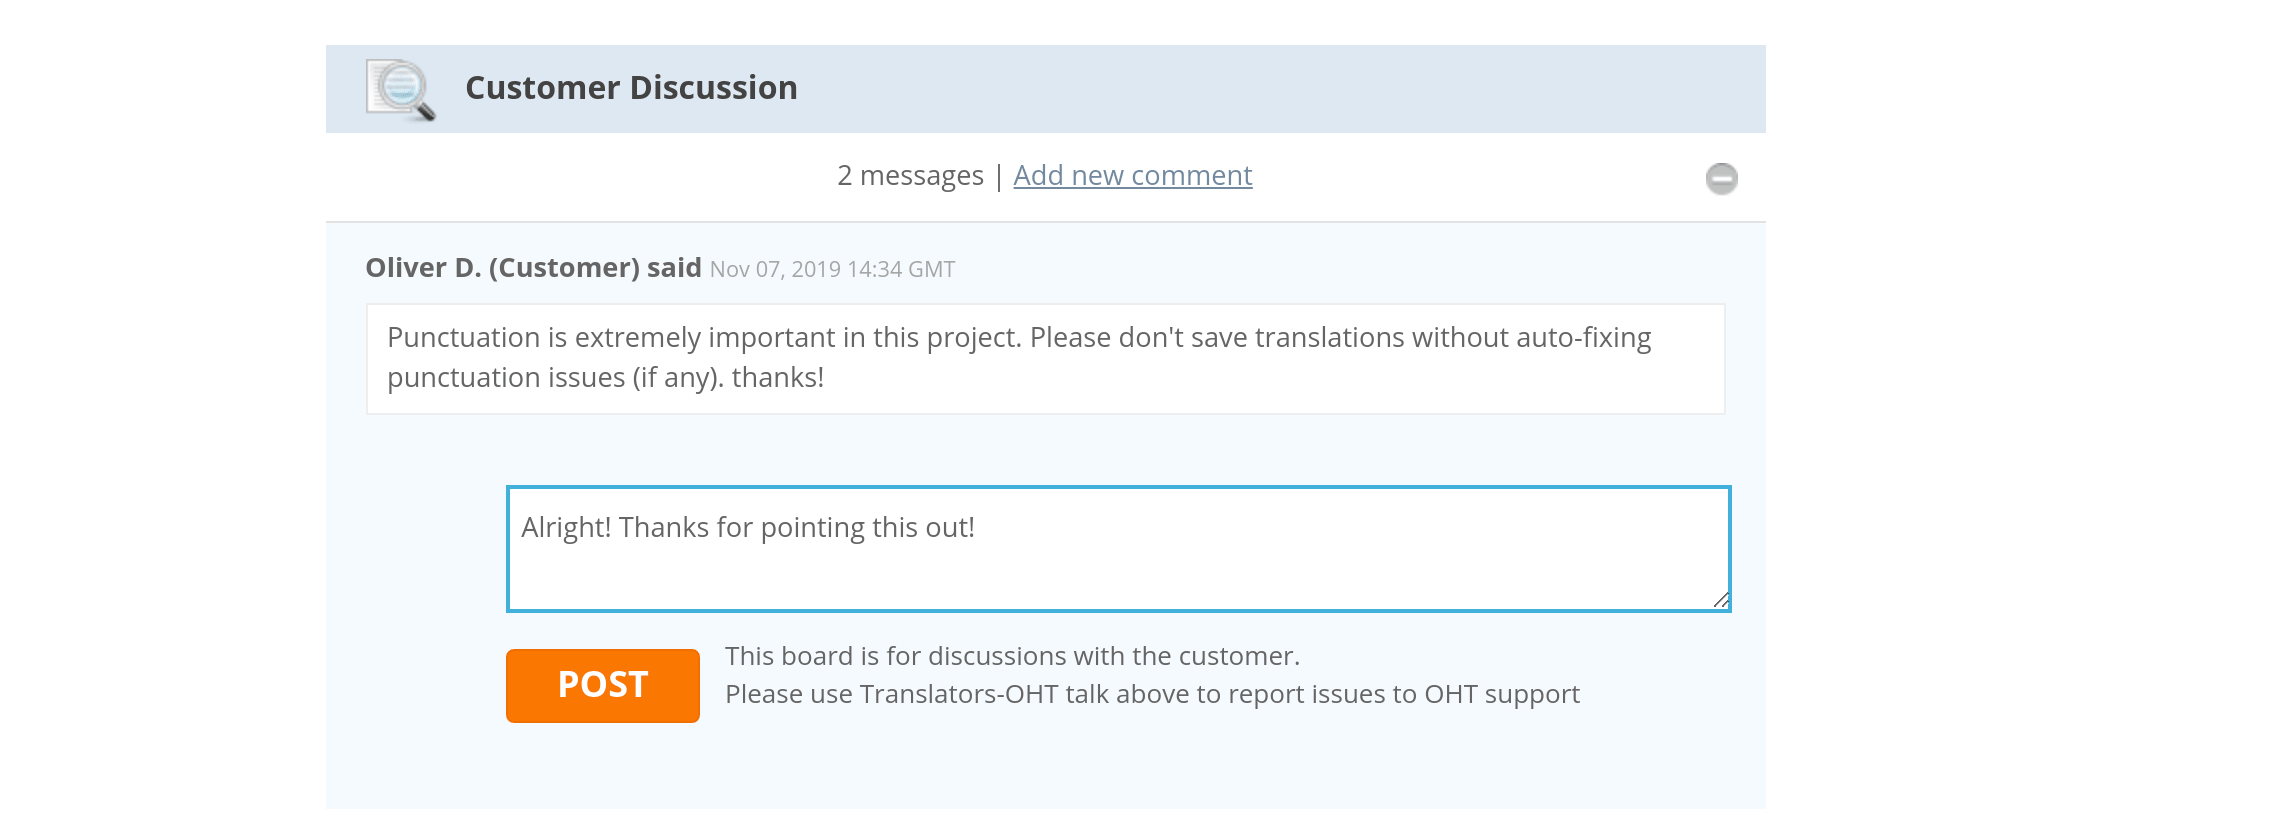 Customer Discussions